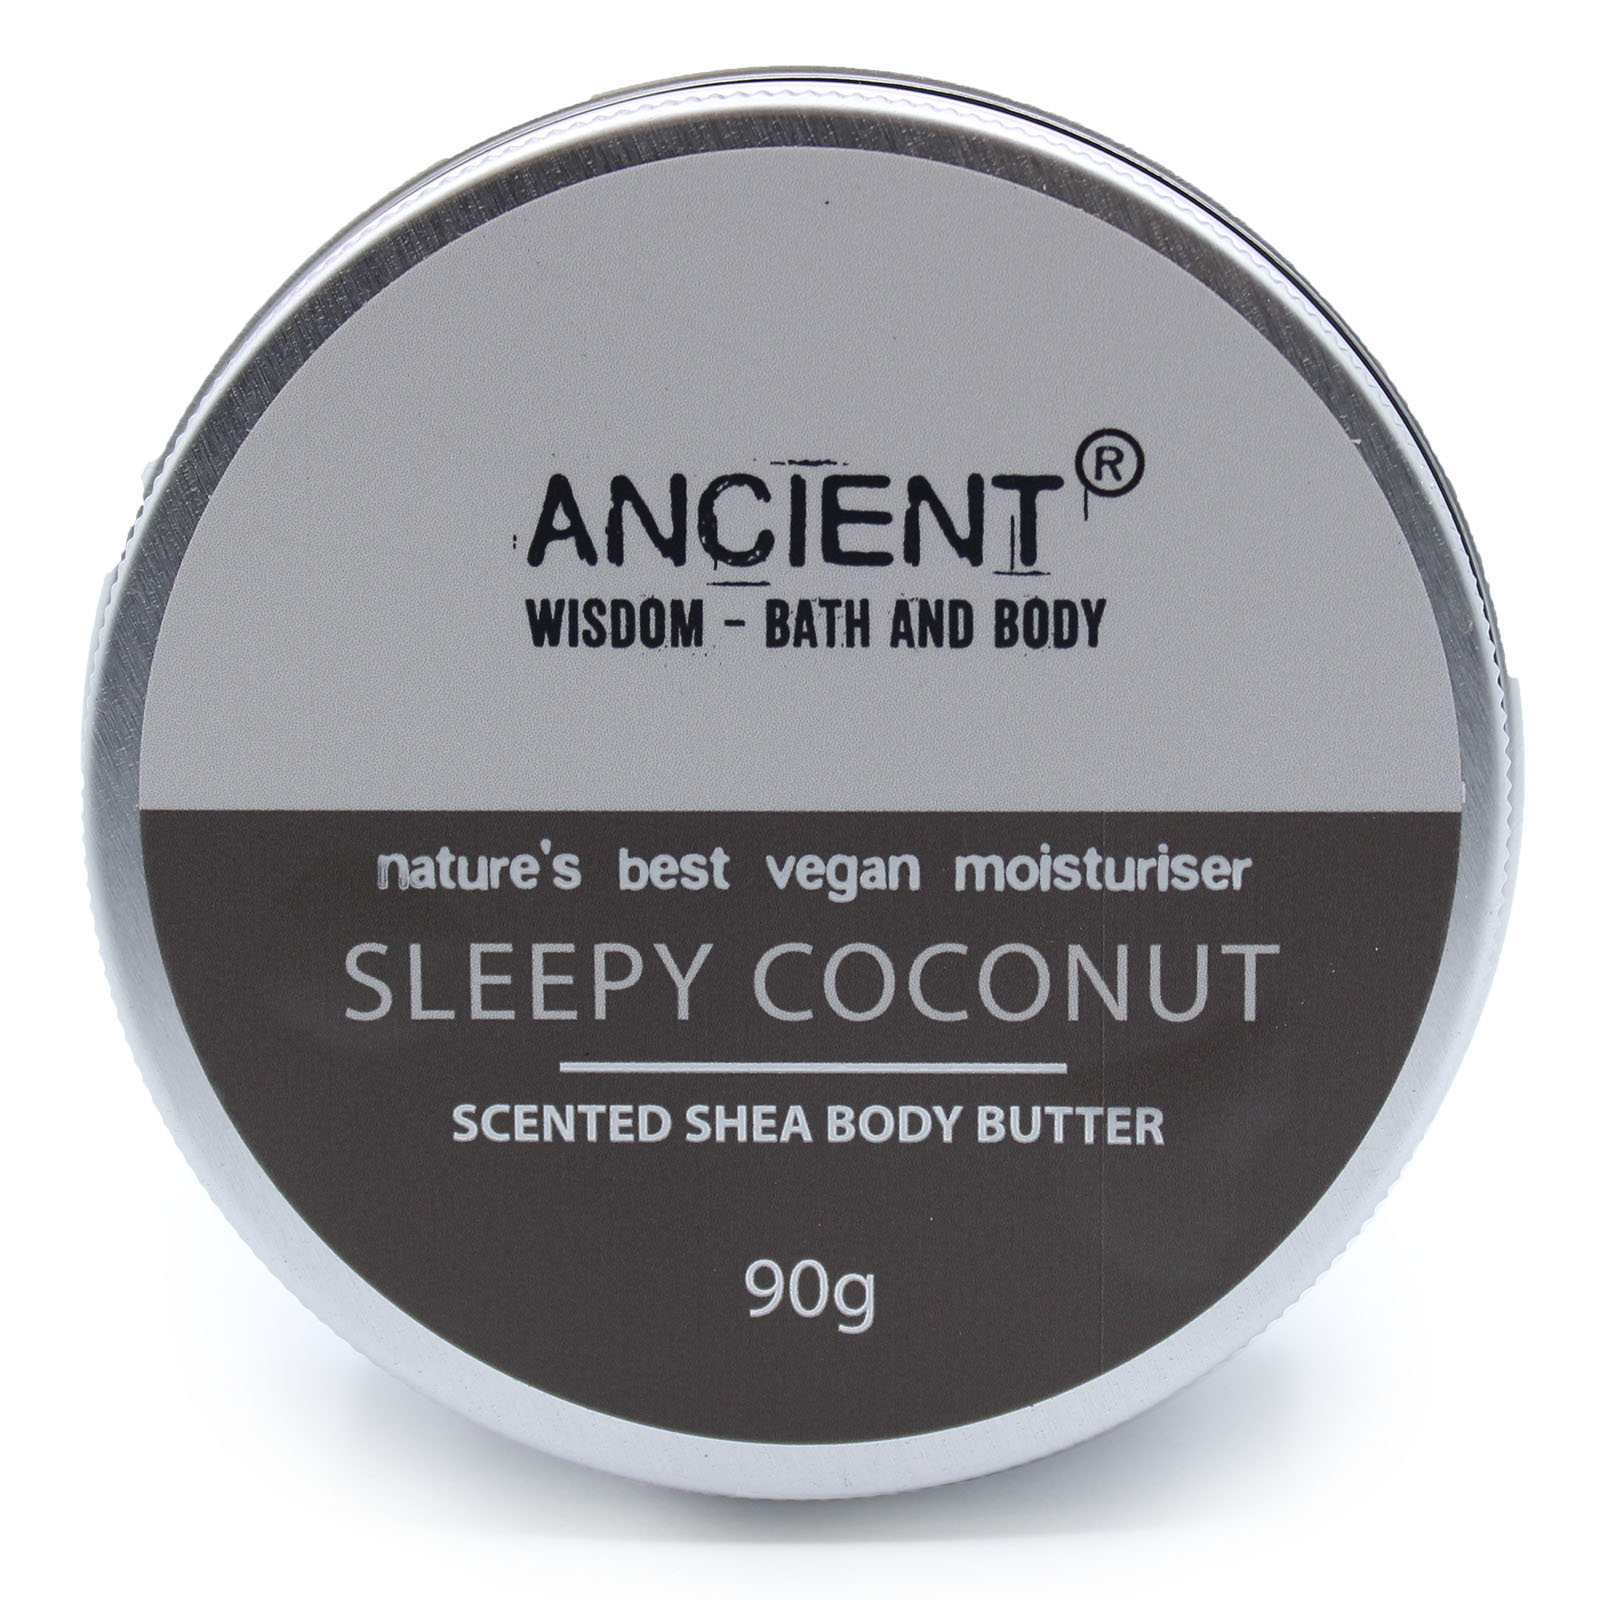 Scented Shea Body Butter 90g - Sleepy Coconut - Click Image to Close